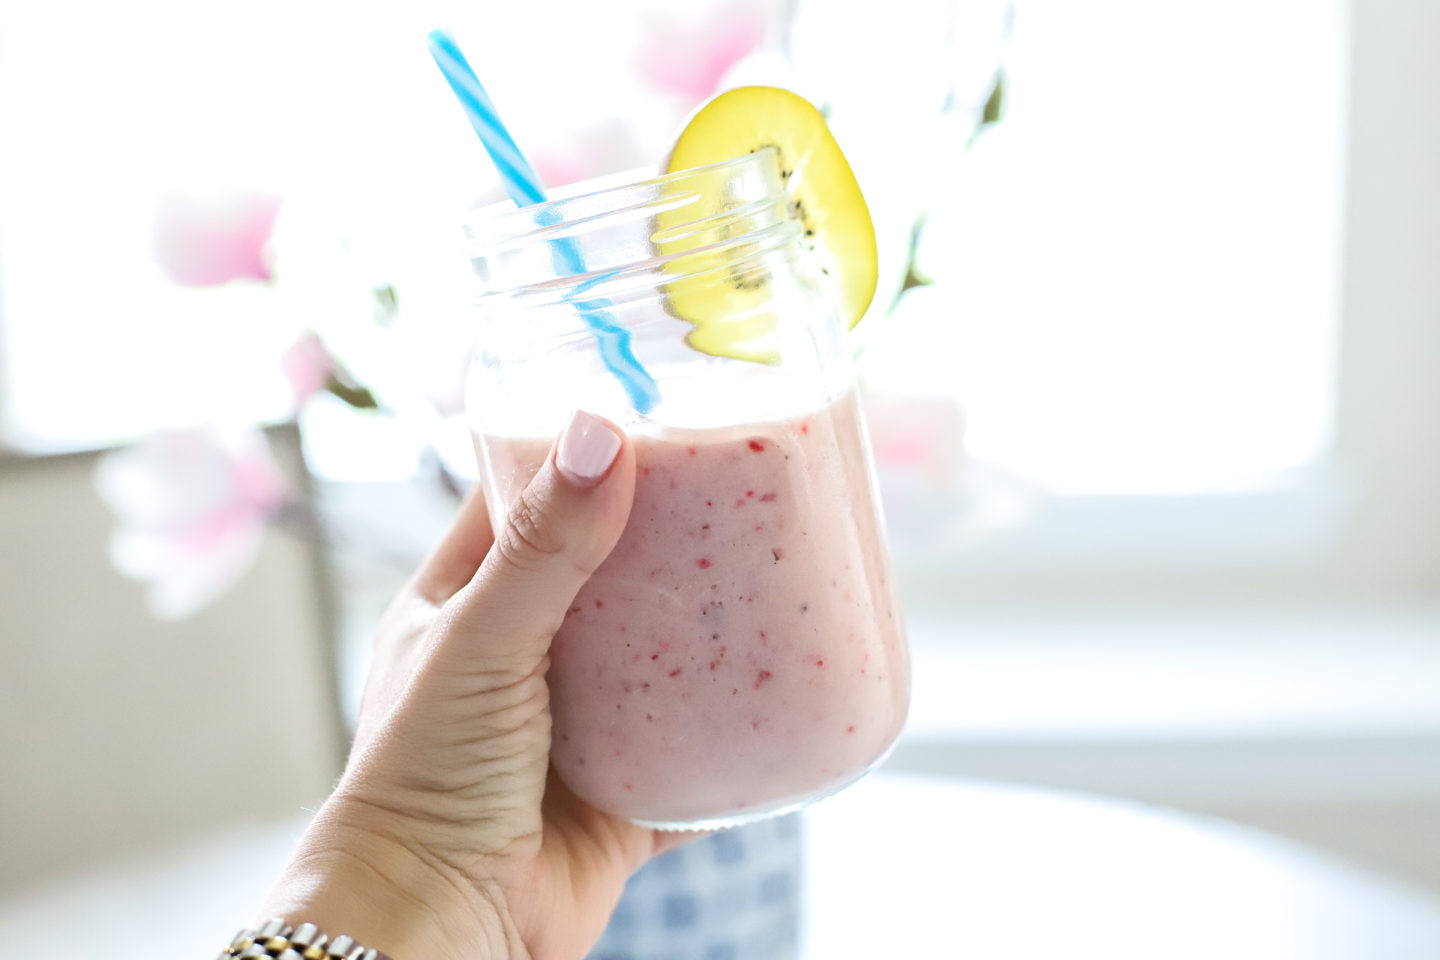 The perfect yellow kiwi strawberry banana smoothie! Perfect for on the go and wandering into new adventures. #WanderWithZespri #ZespriSunGoldKiwifruit #Zespri #Ad